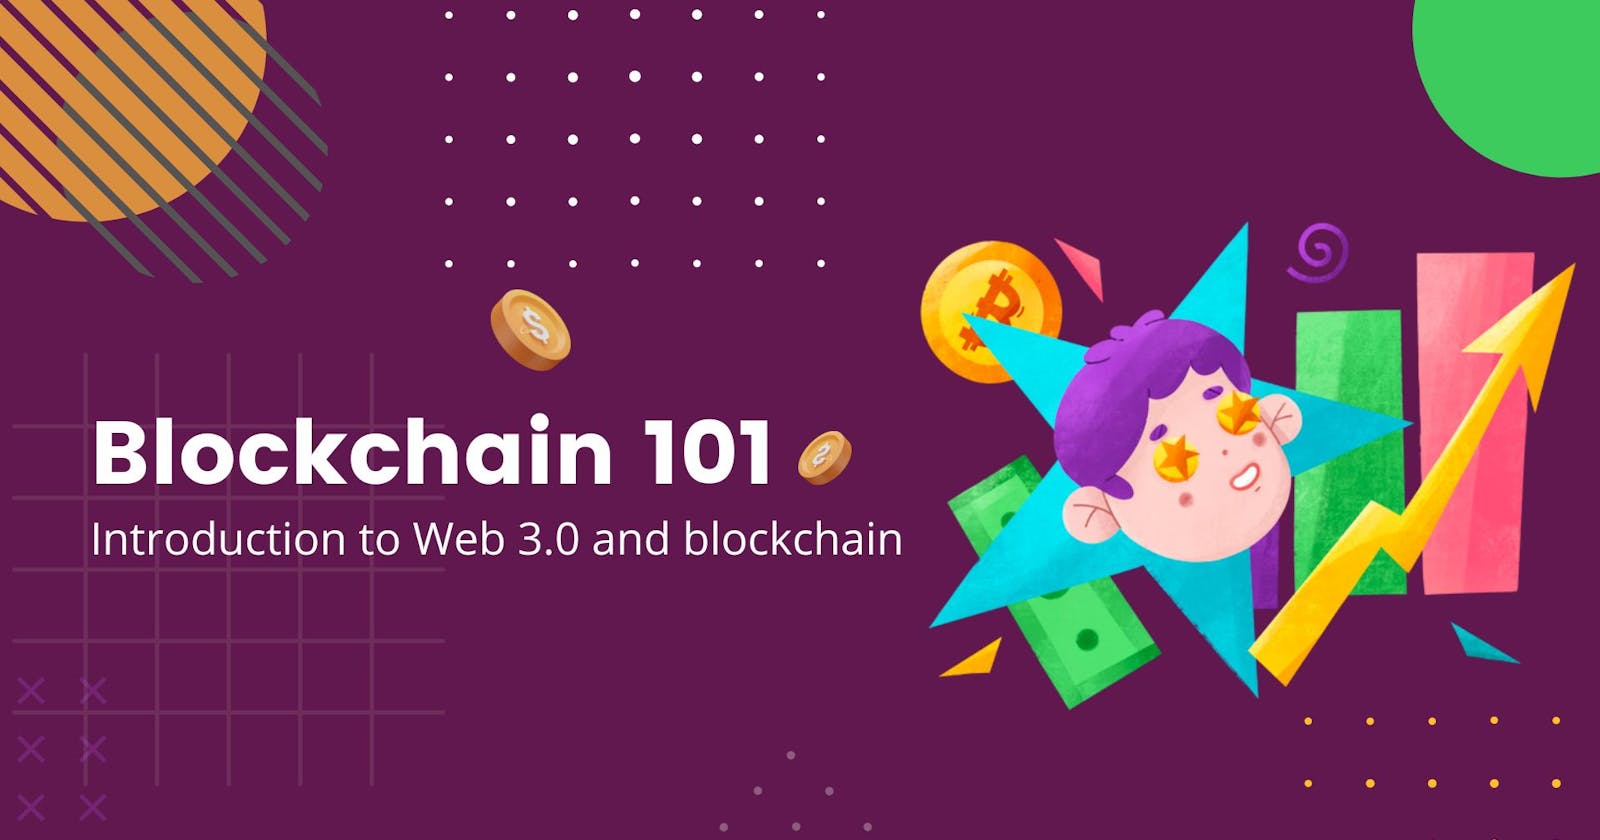 Blockchain 101: Introduction to Web 3.0 and blockchain